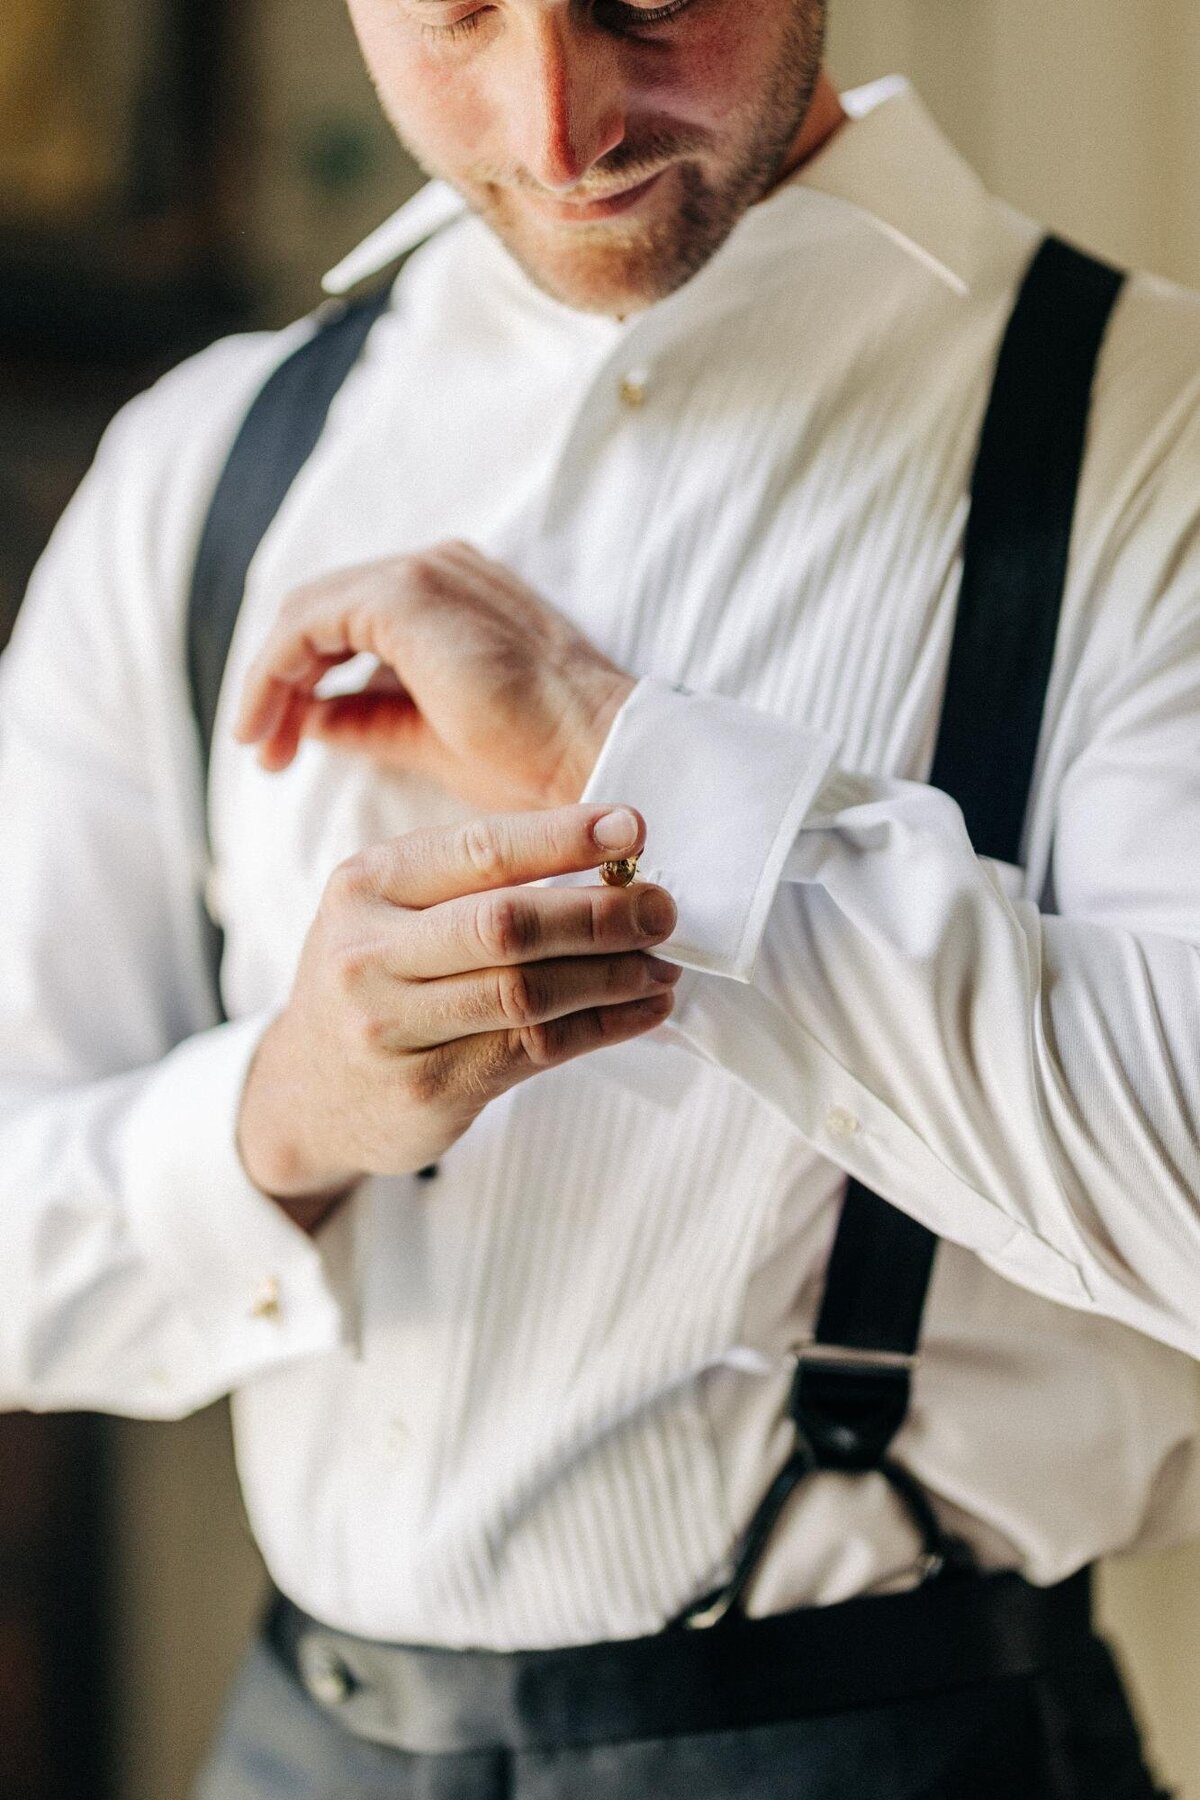 Man in a white shirt and suspenders adjusting his cufflink.